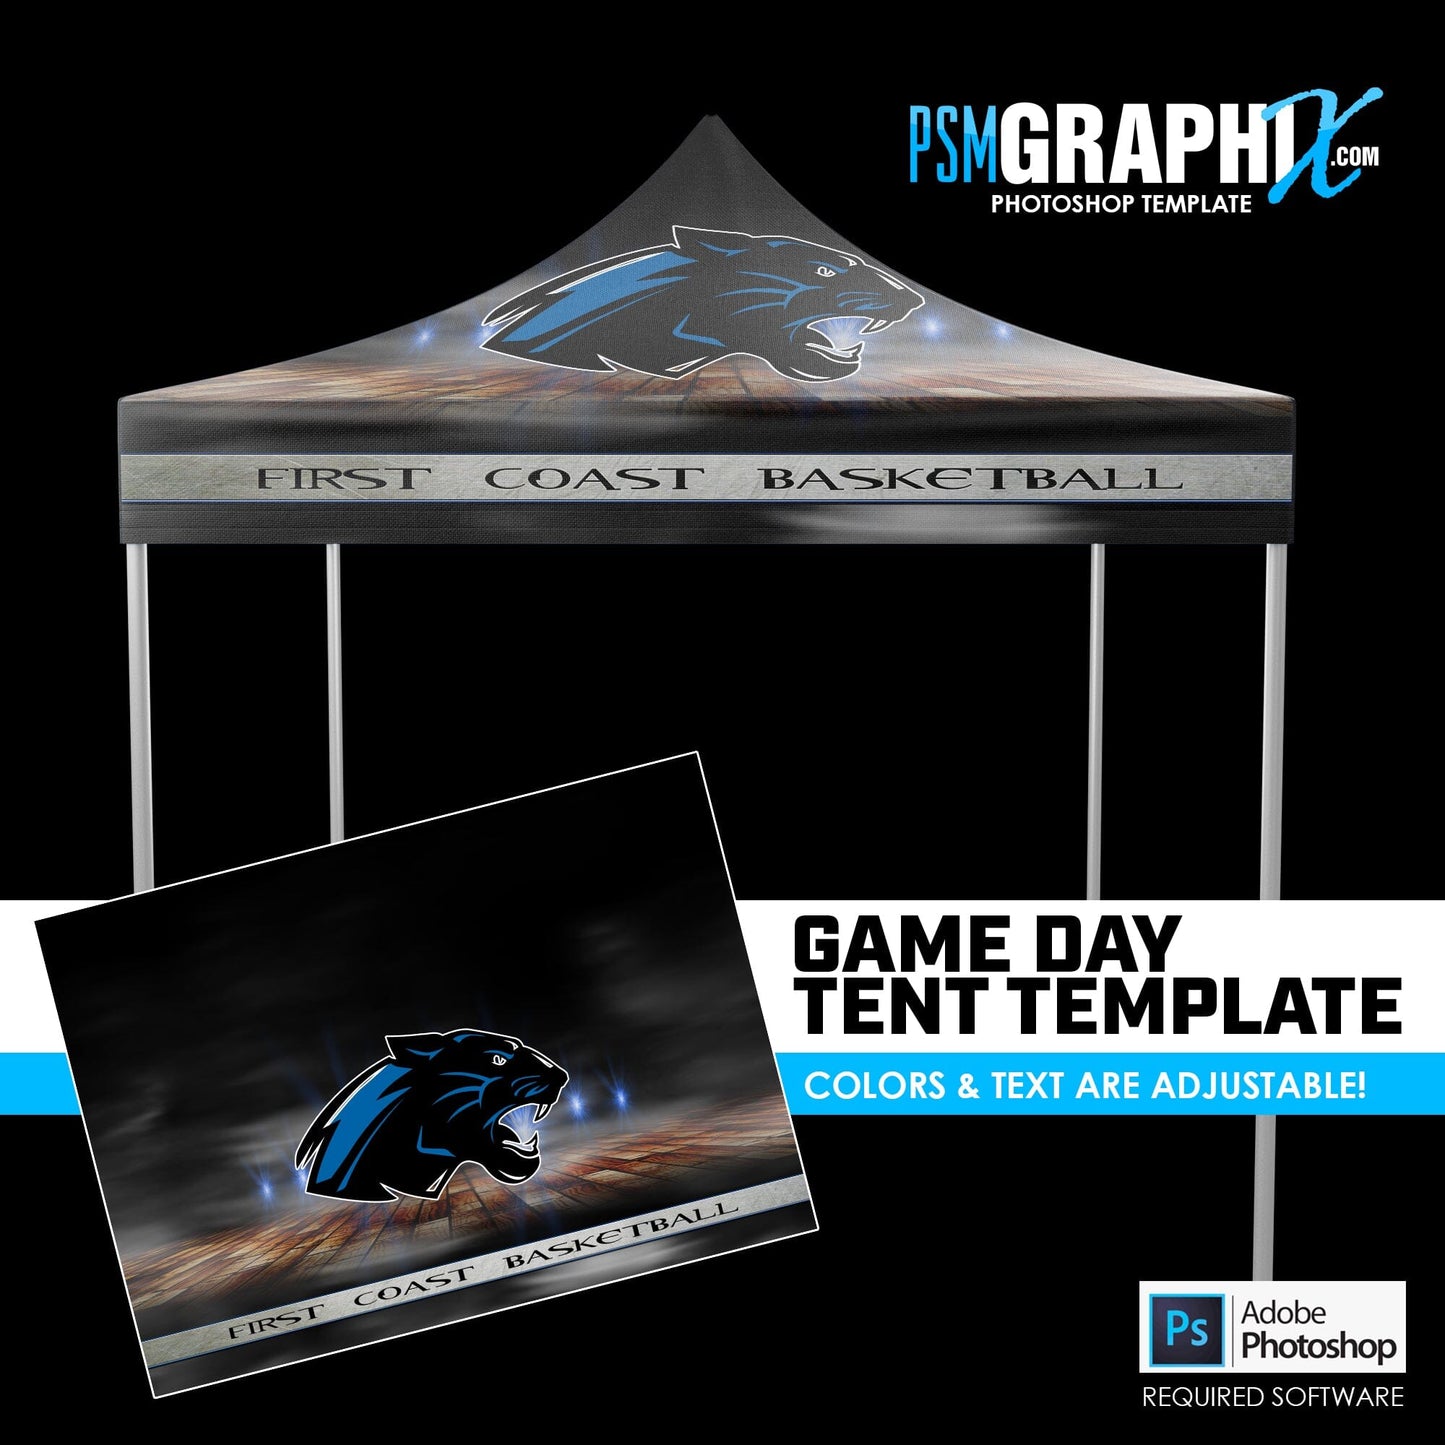 Vapor V.1 - Game Day Photoshop Tent Template-Photoshop Template - PSMGraphix